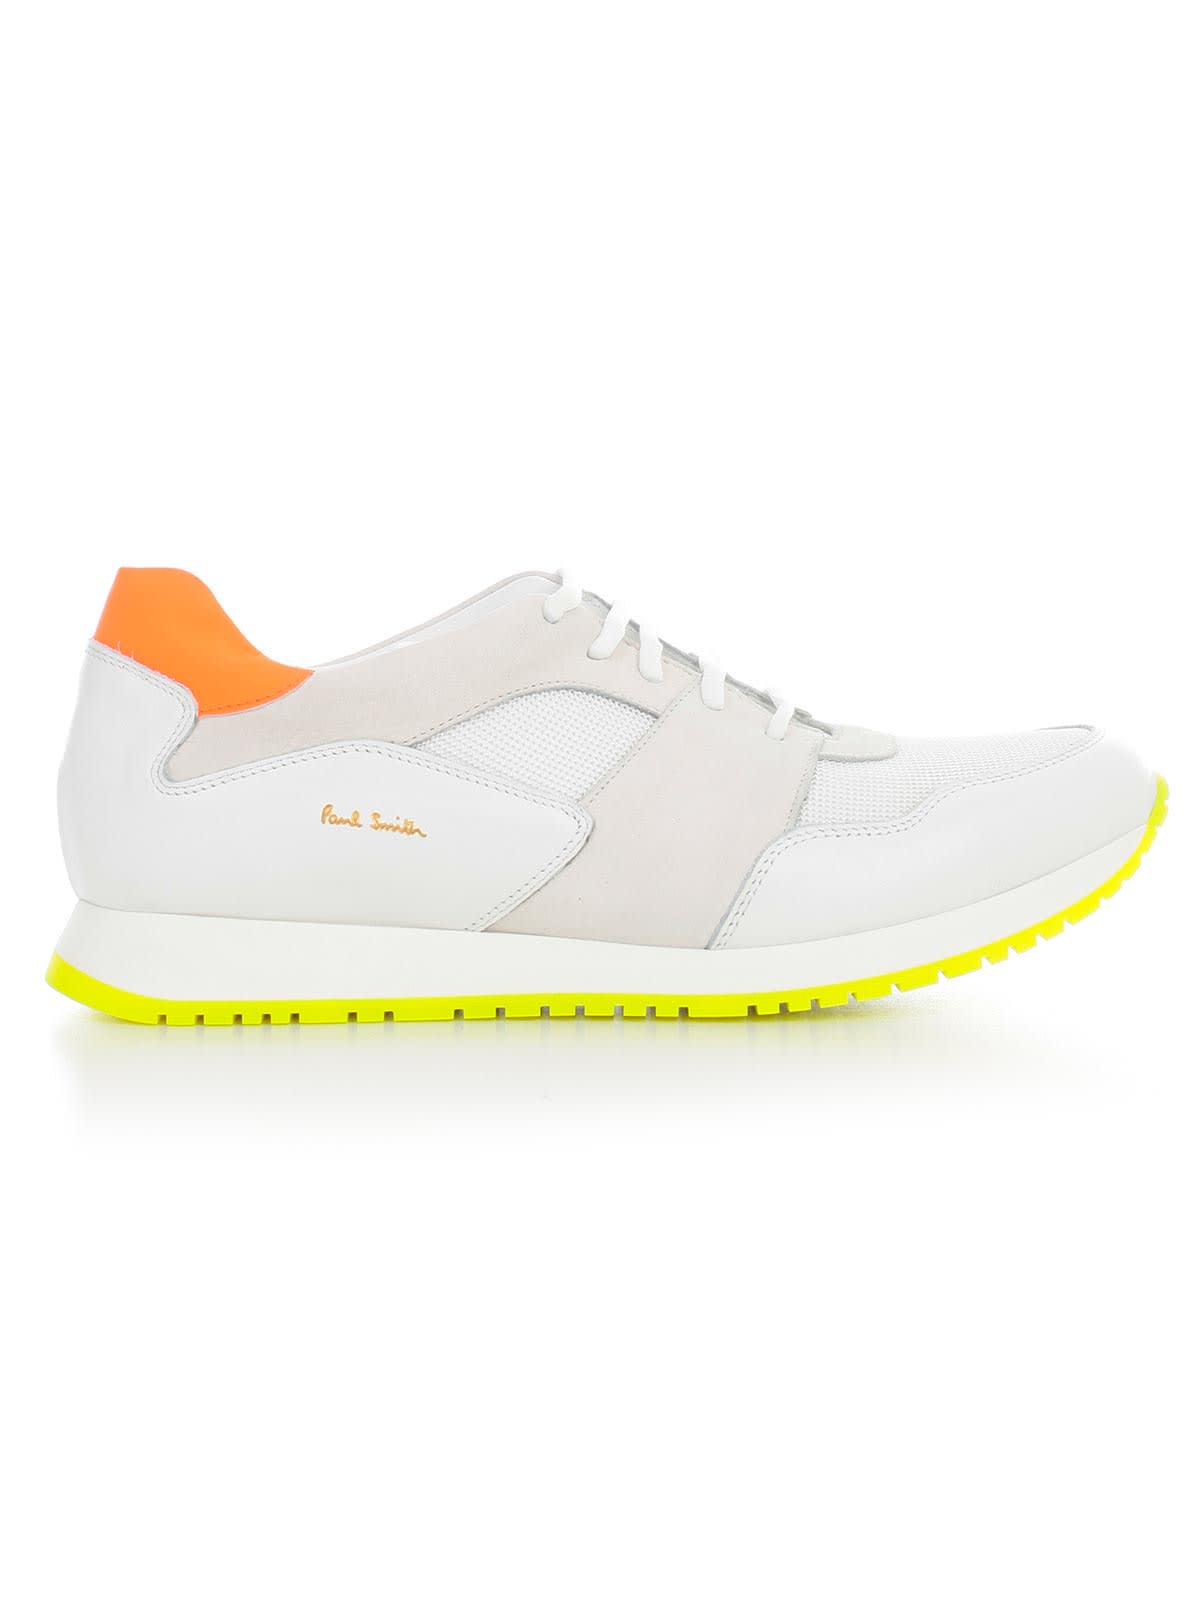 PAUL SMITH RUNNING SHOES PIONEER,11221145